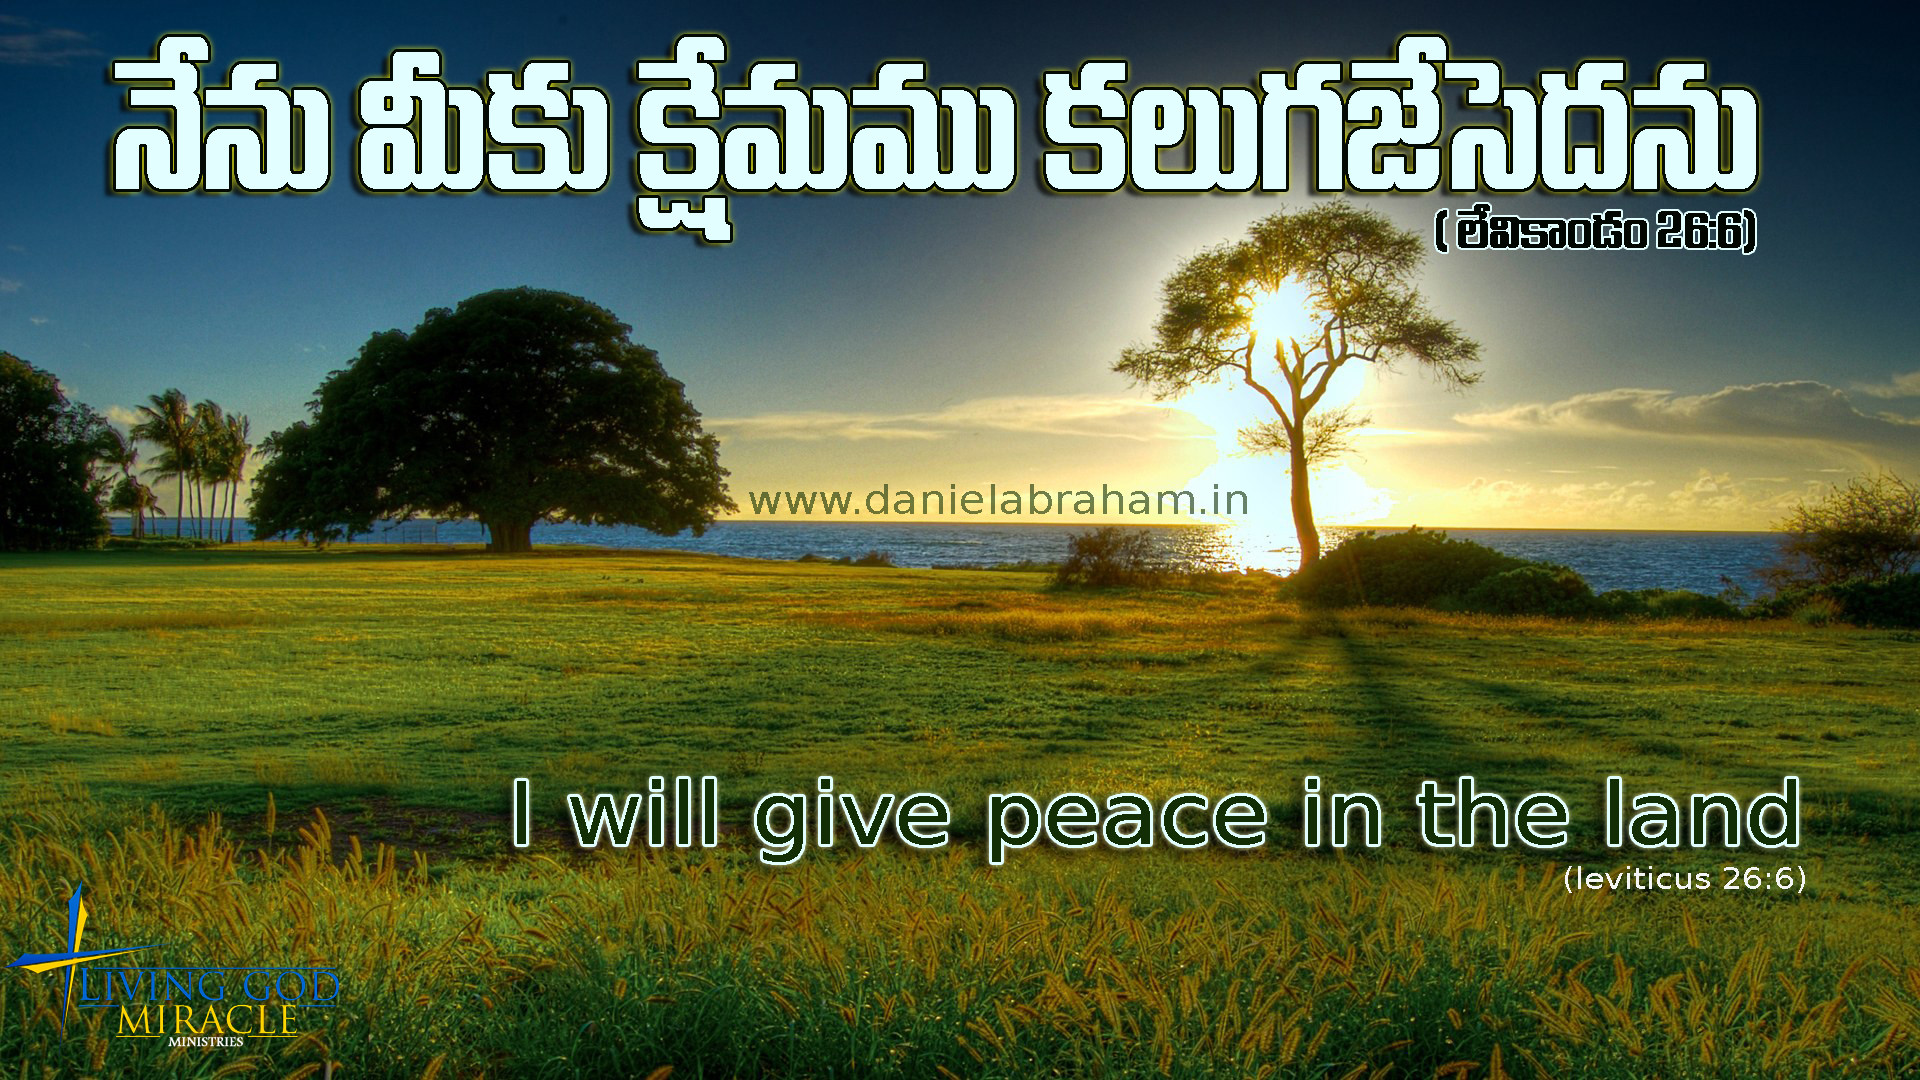 Christian Wallpapers With Bible Verses For Mobile In - Bible Promises In Telugu - HD Wallpaper 